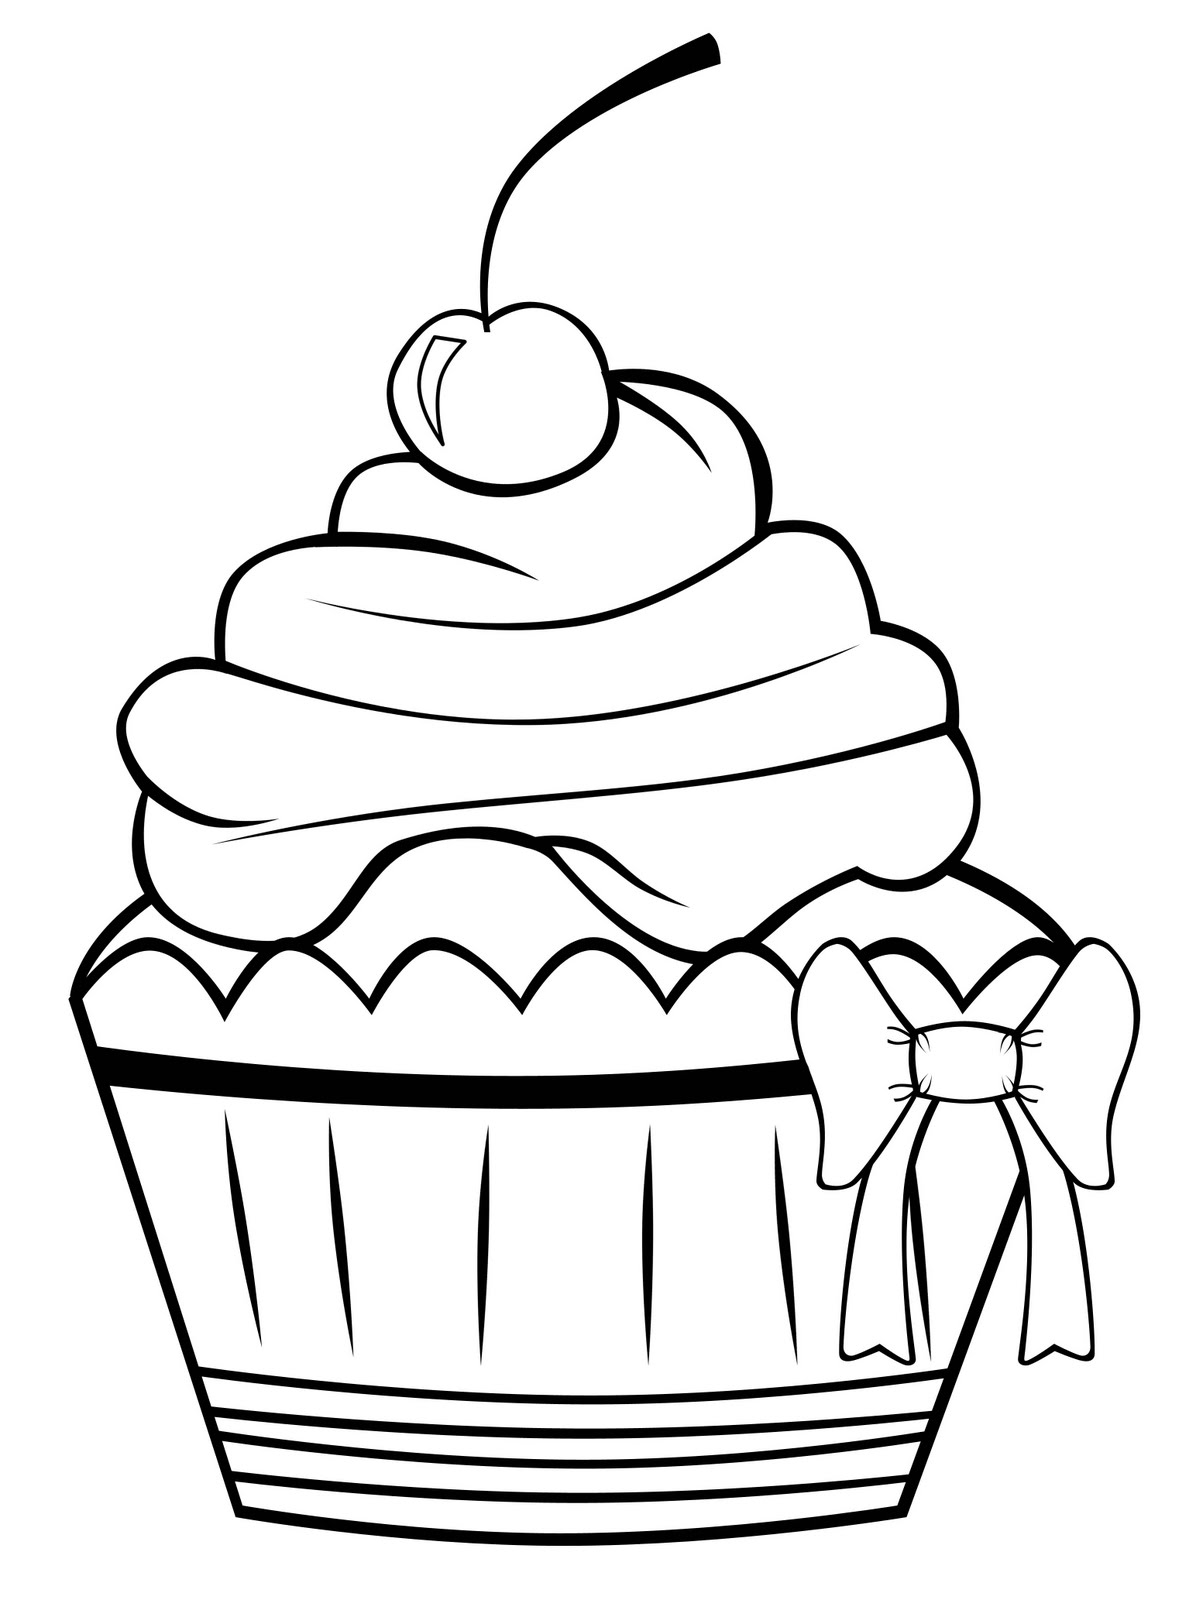 Cupcakes Drawing Black And White - ClipArt Best